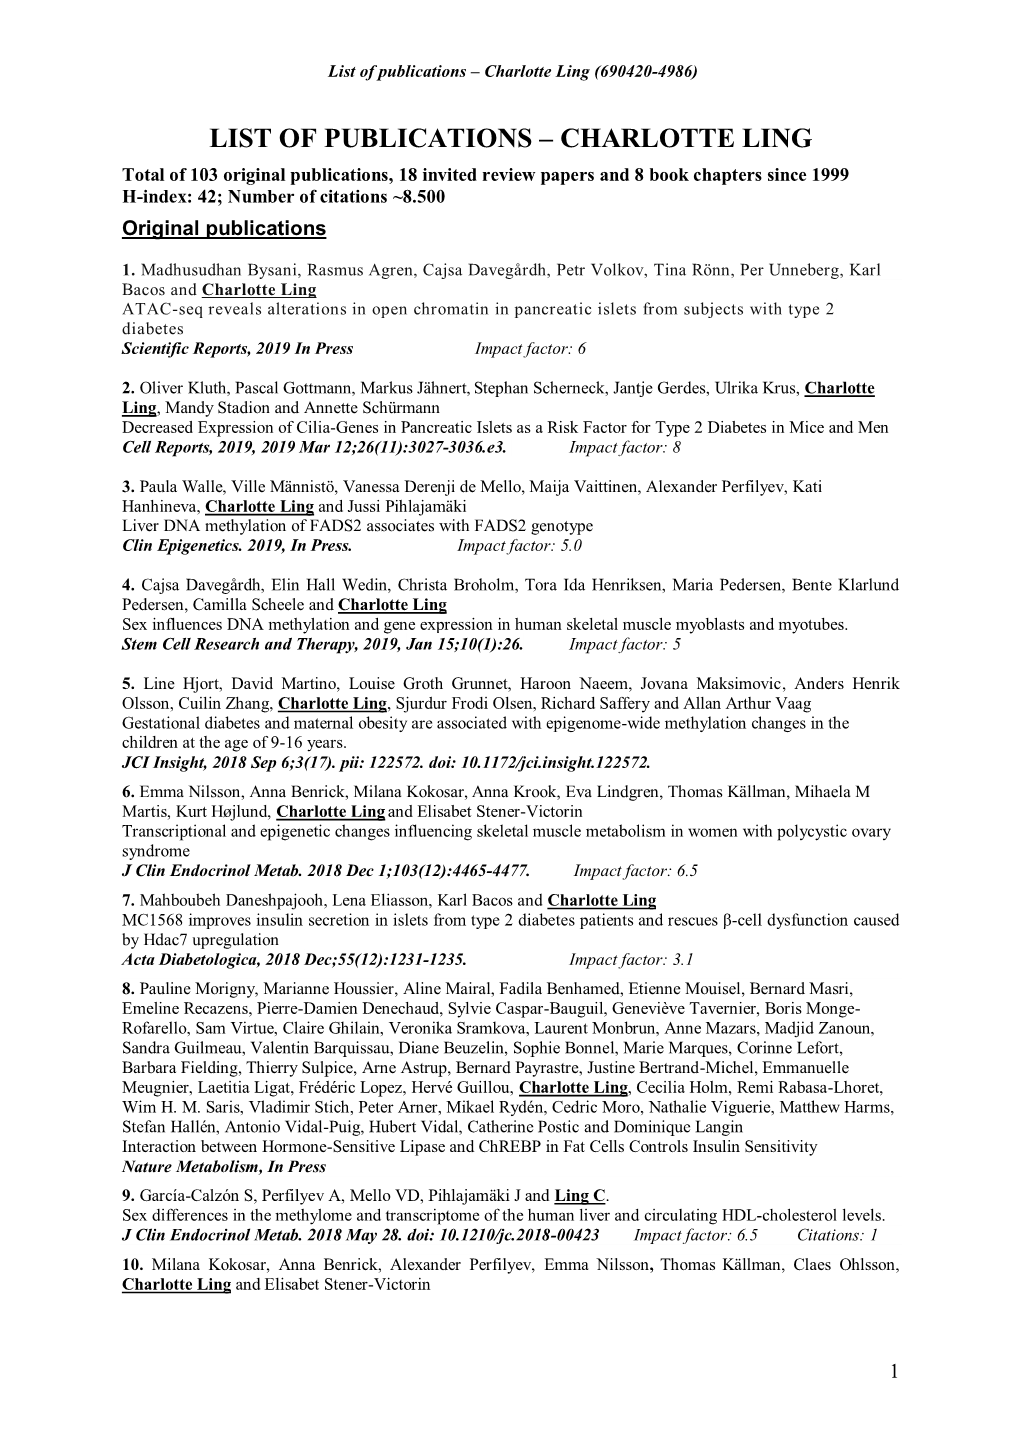 List of Publications – Charlotte Ling (690420-4986)